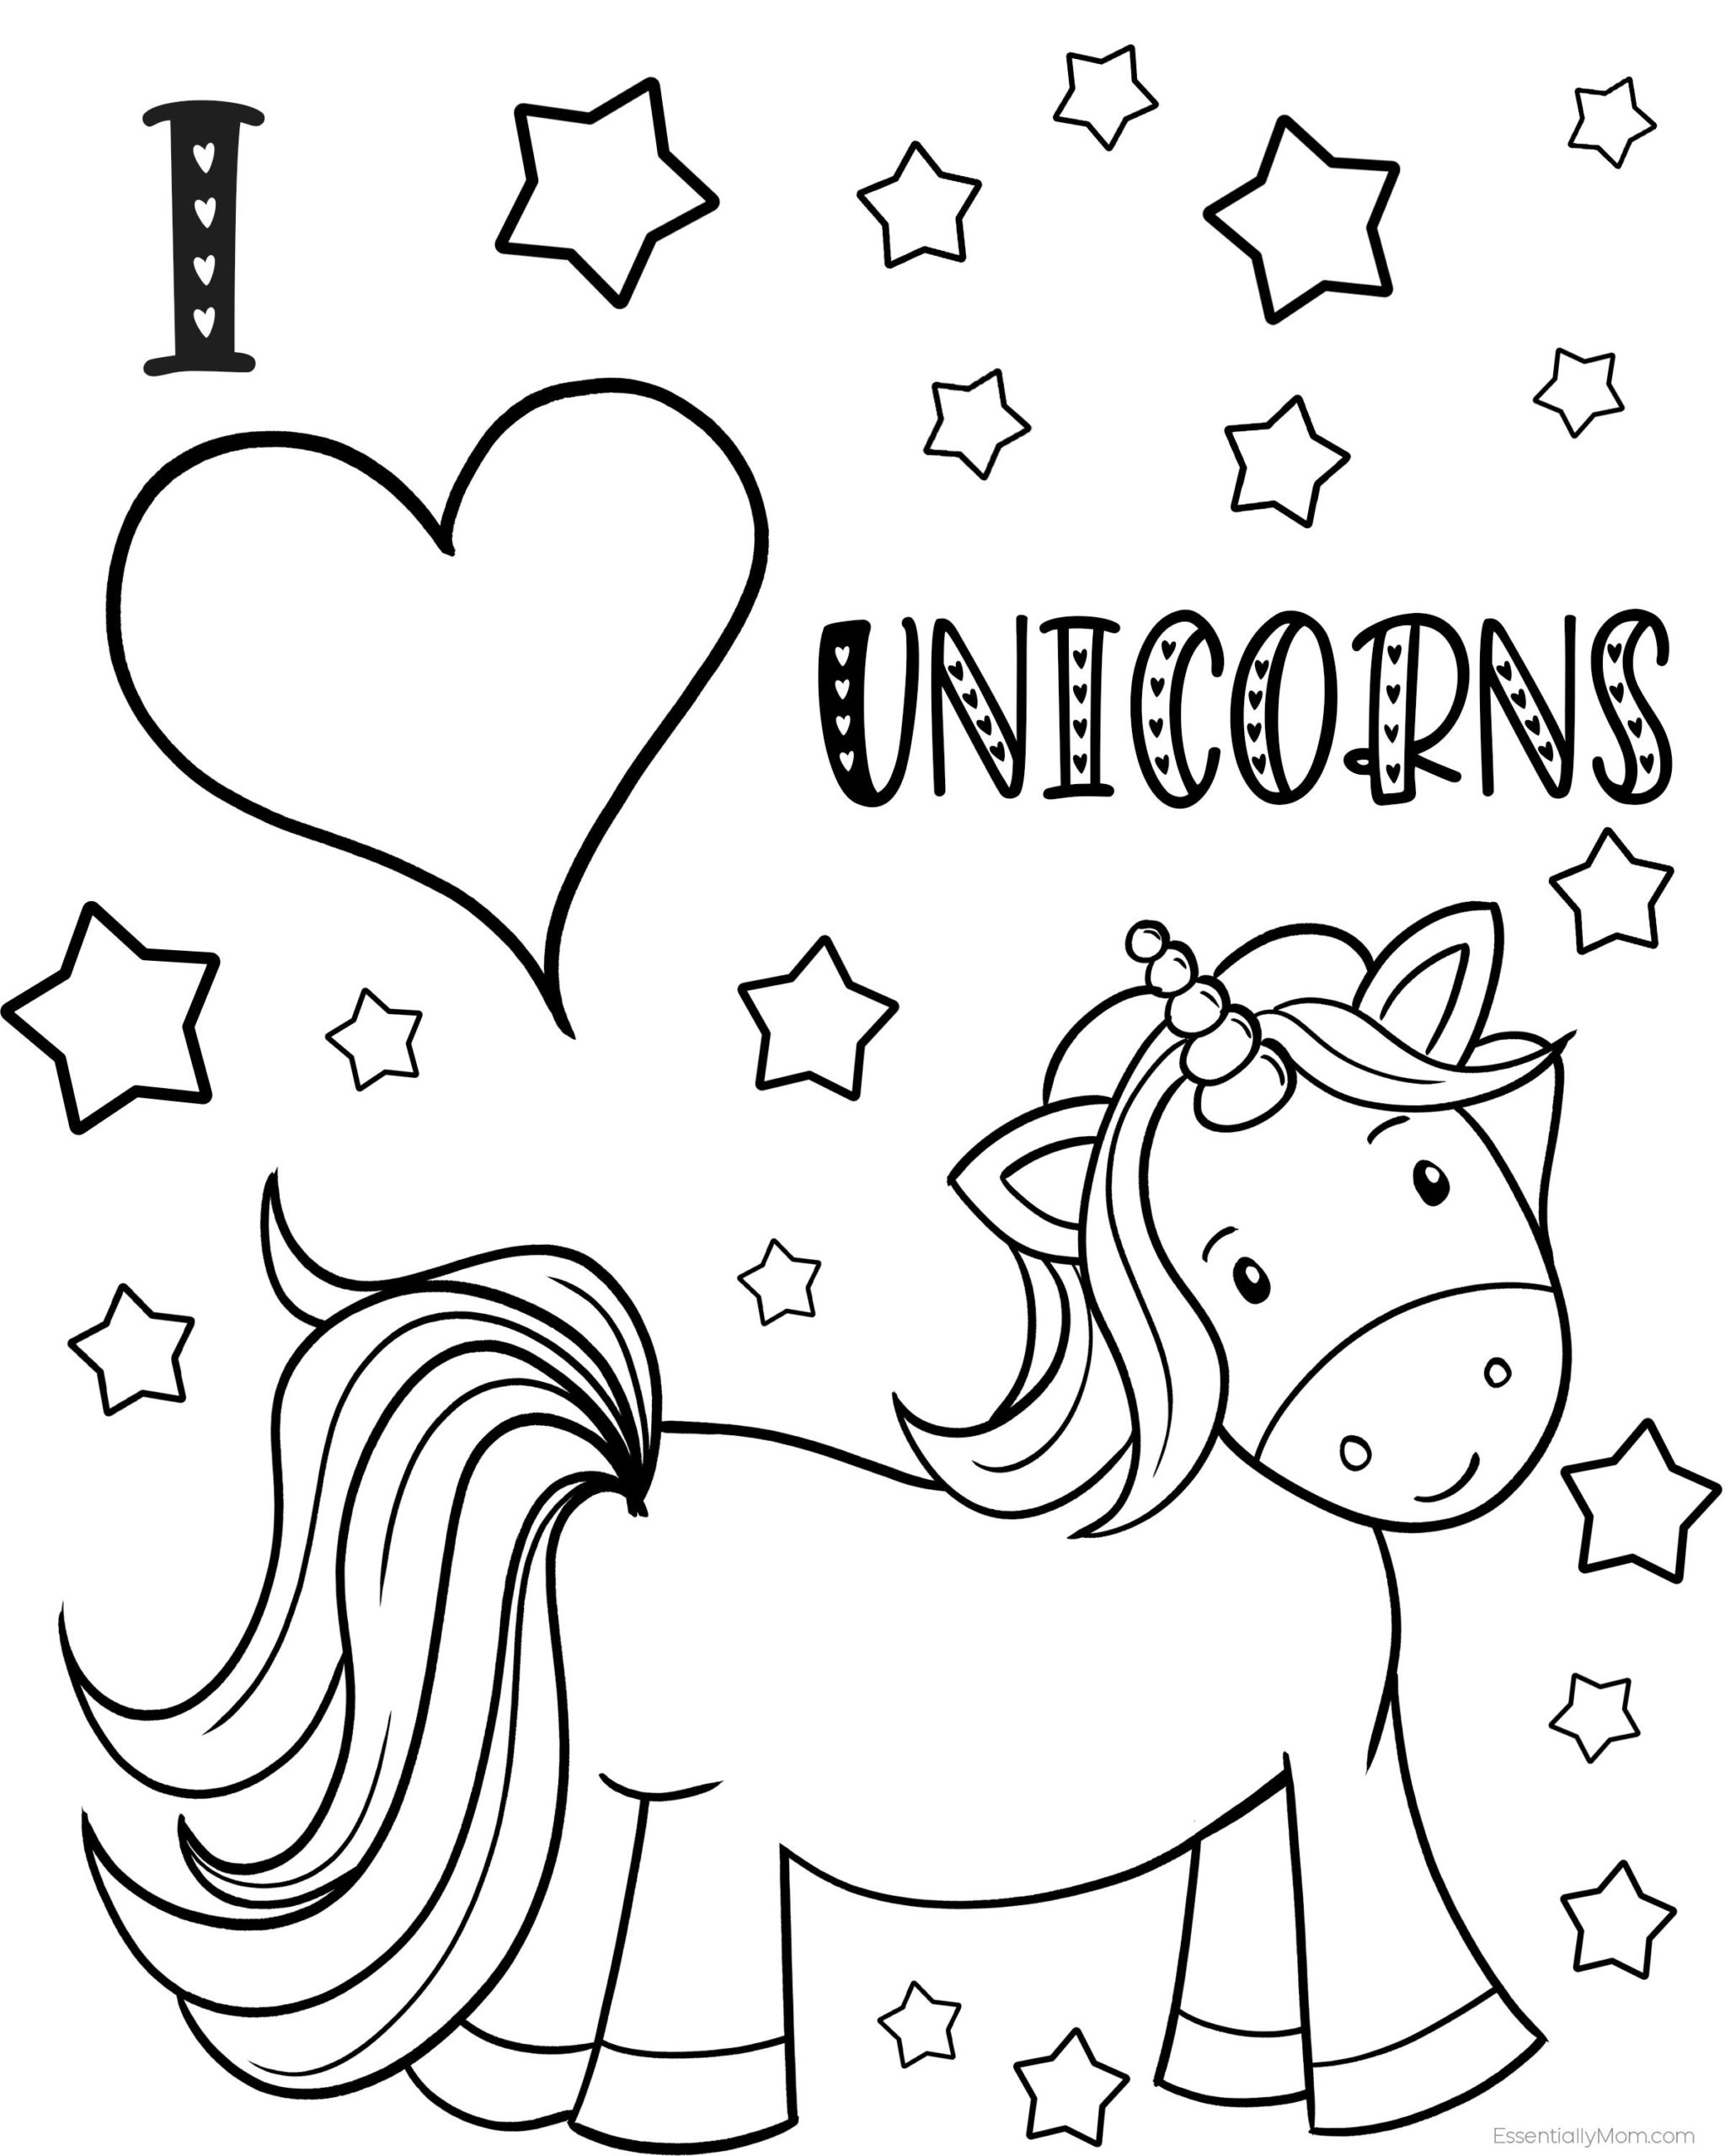 FREE Unicorn Coloring Pages Printable for Kids | Unicorn coloring book